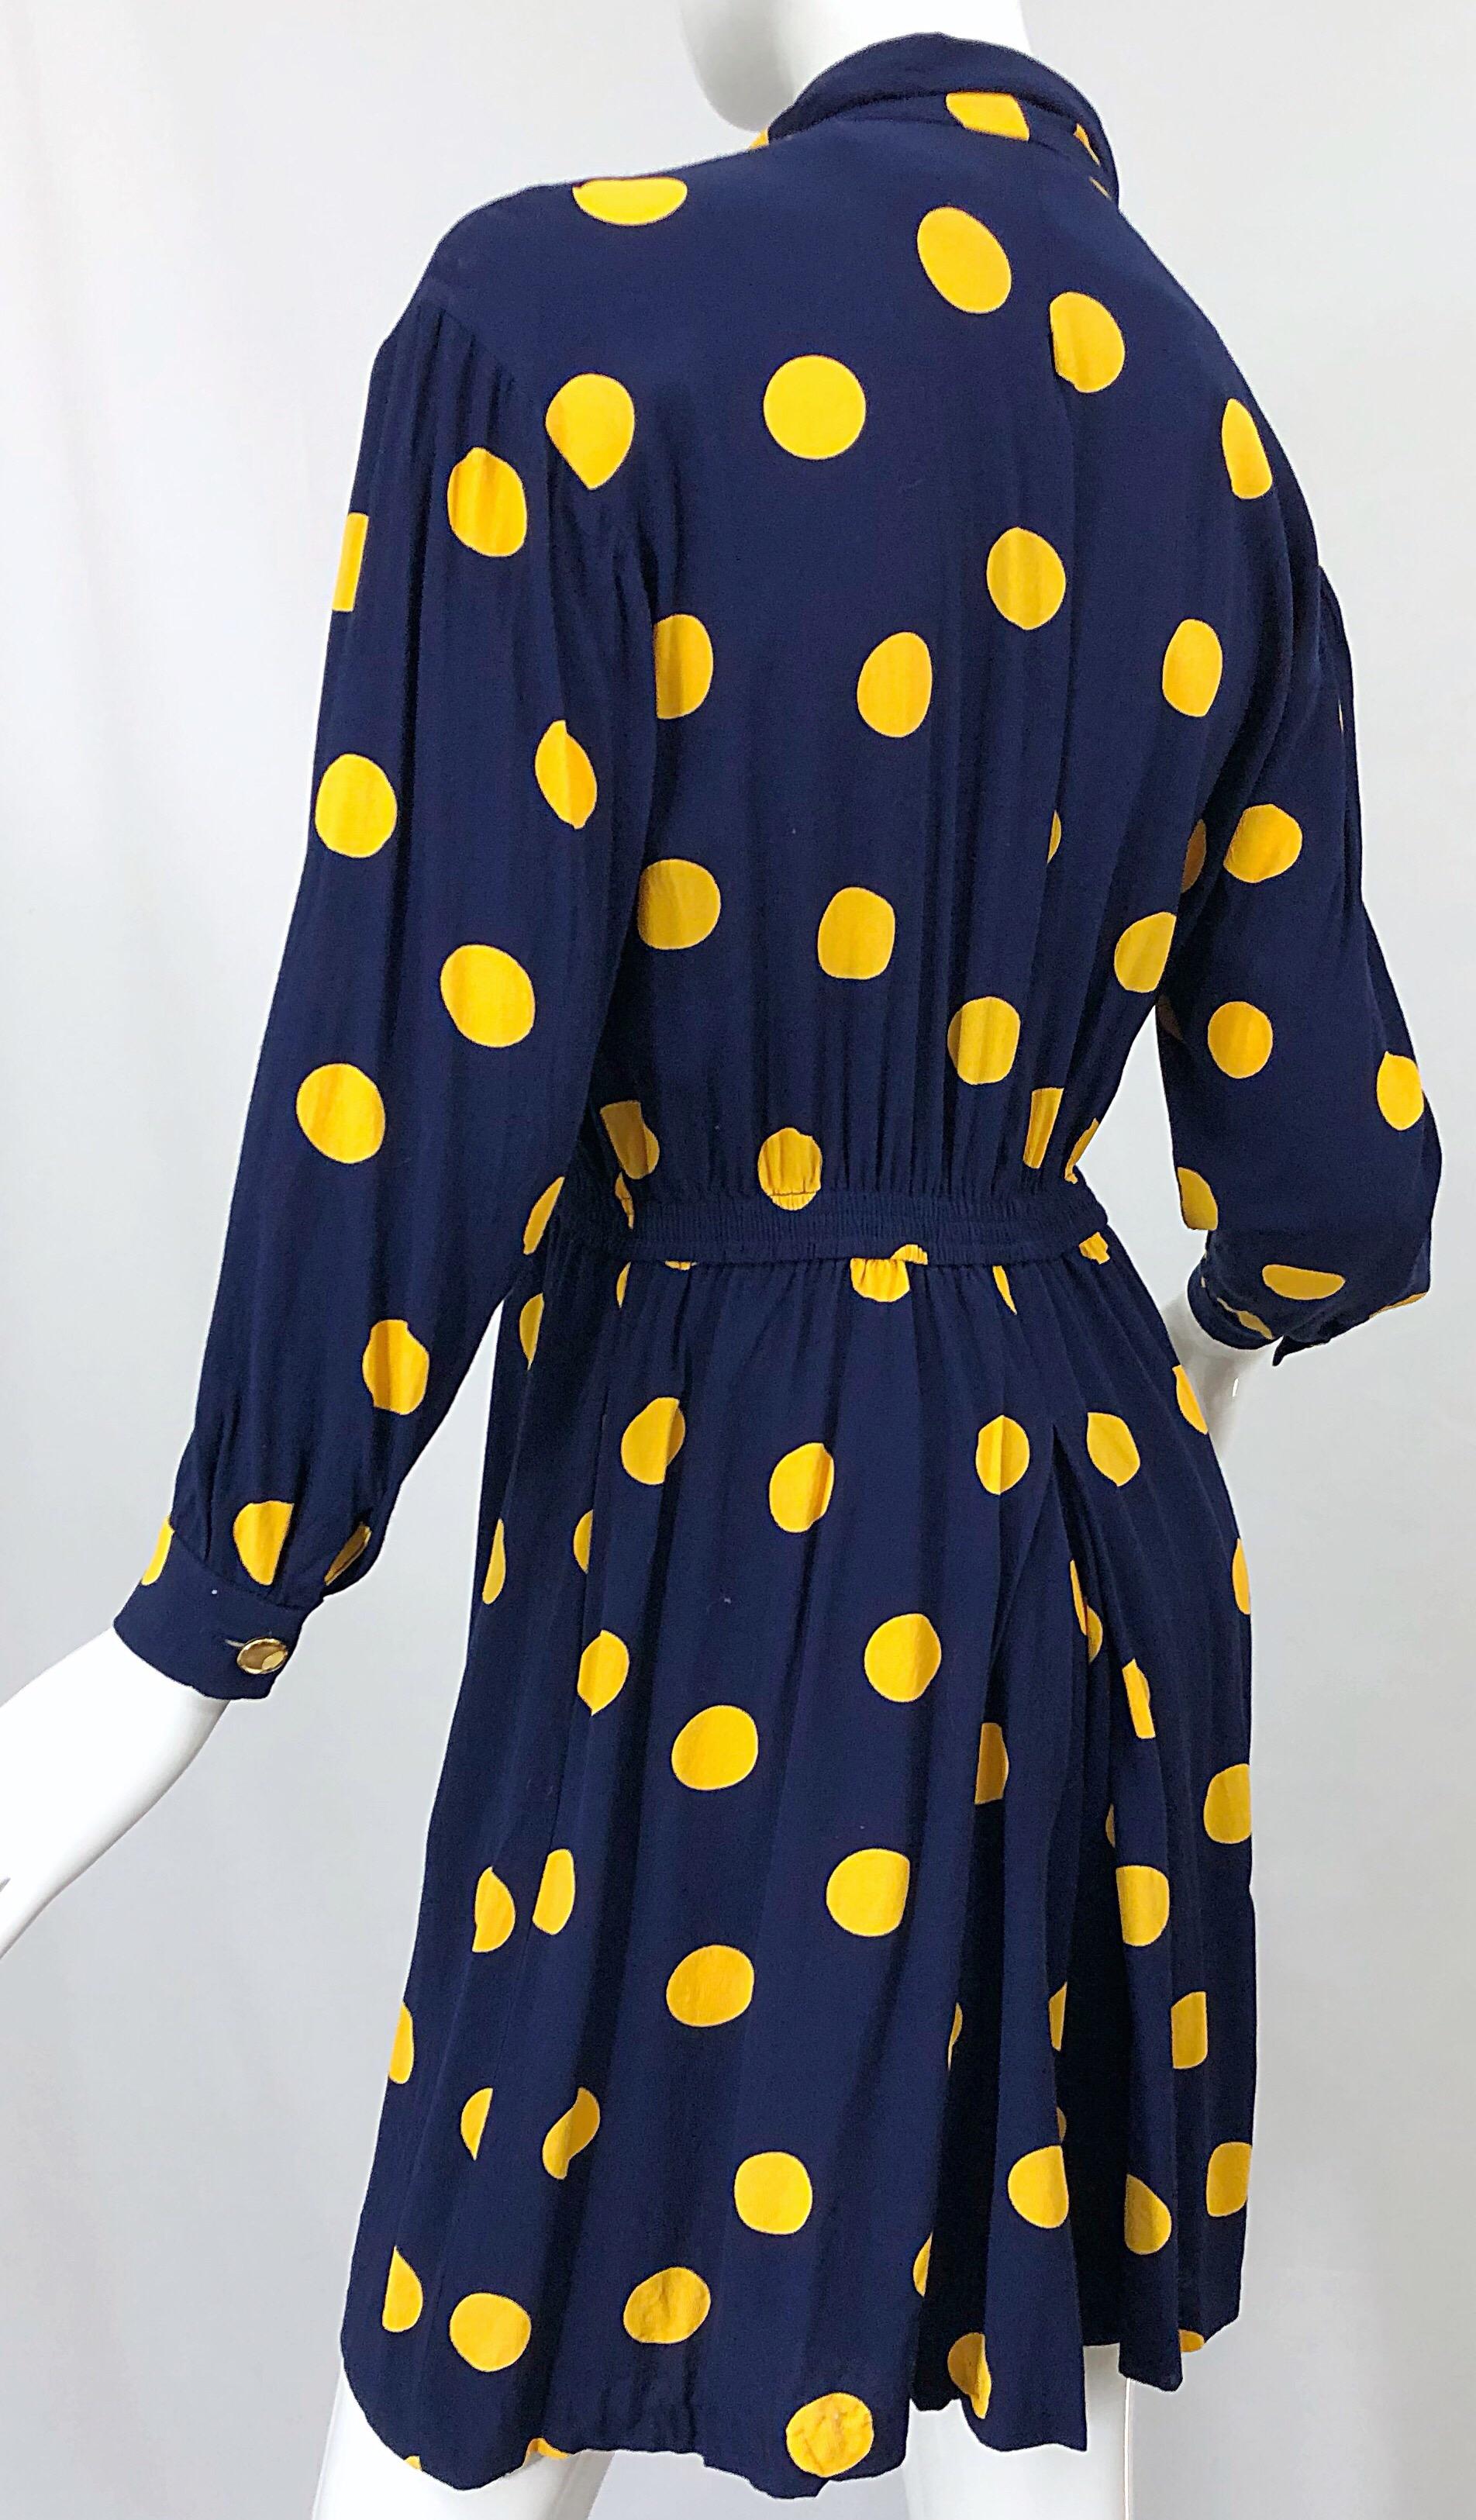 Size 8 Romper Late 1980s Navy Blue and Yellow Polka Dot 80s Vintage Romper 2